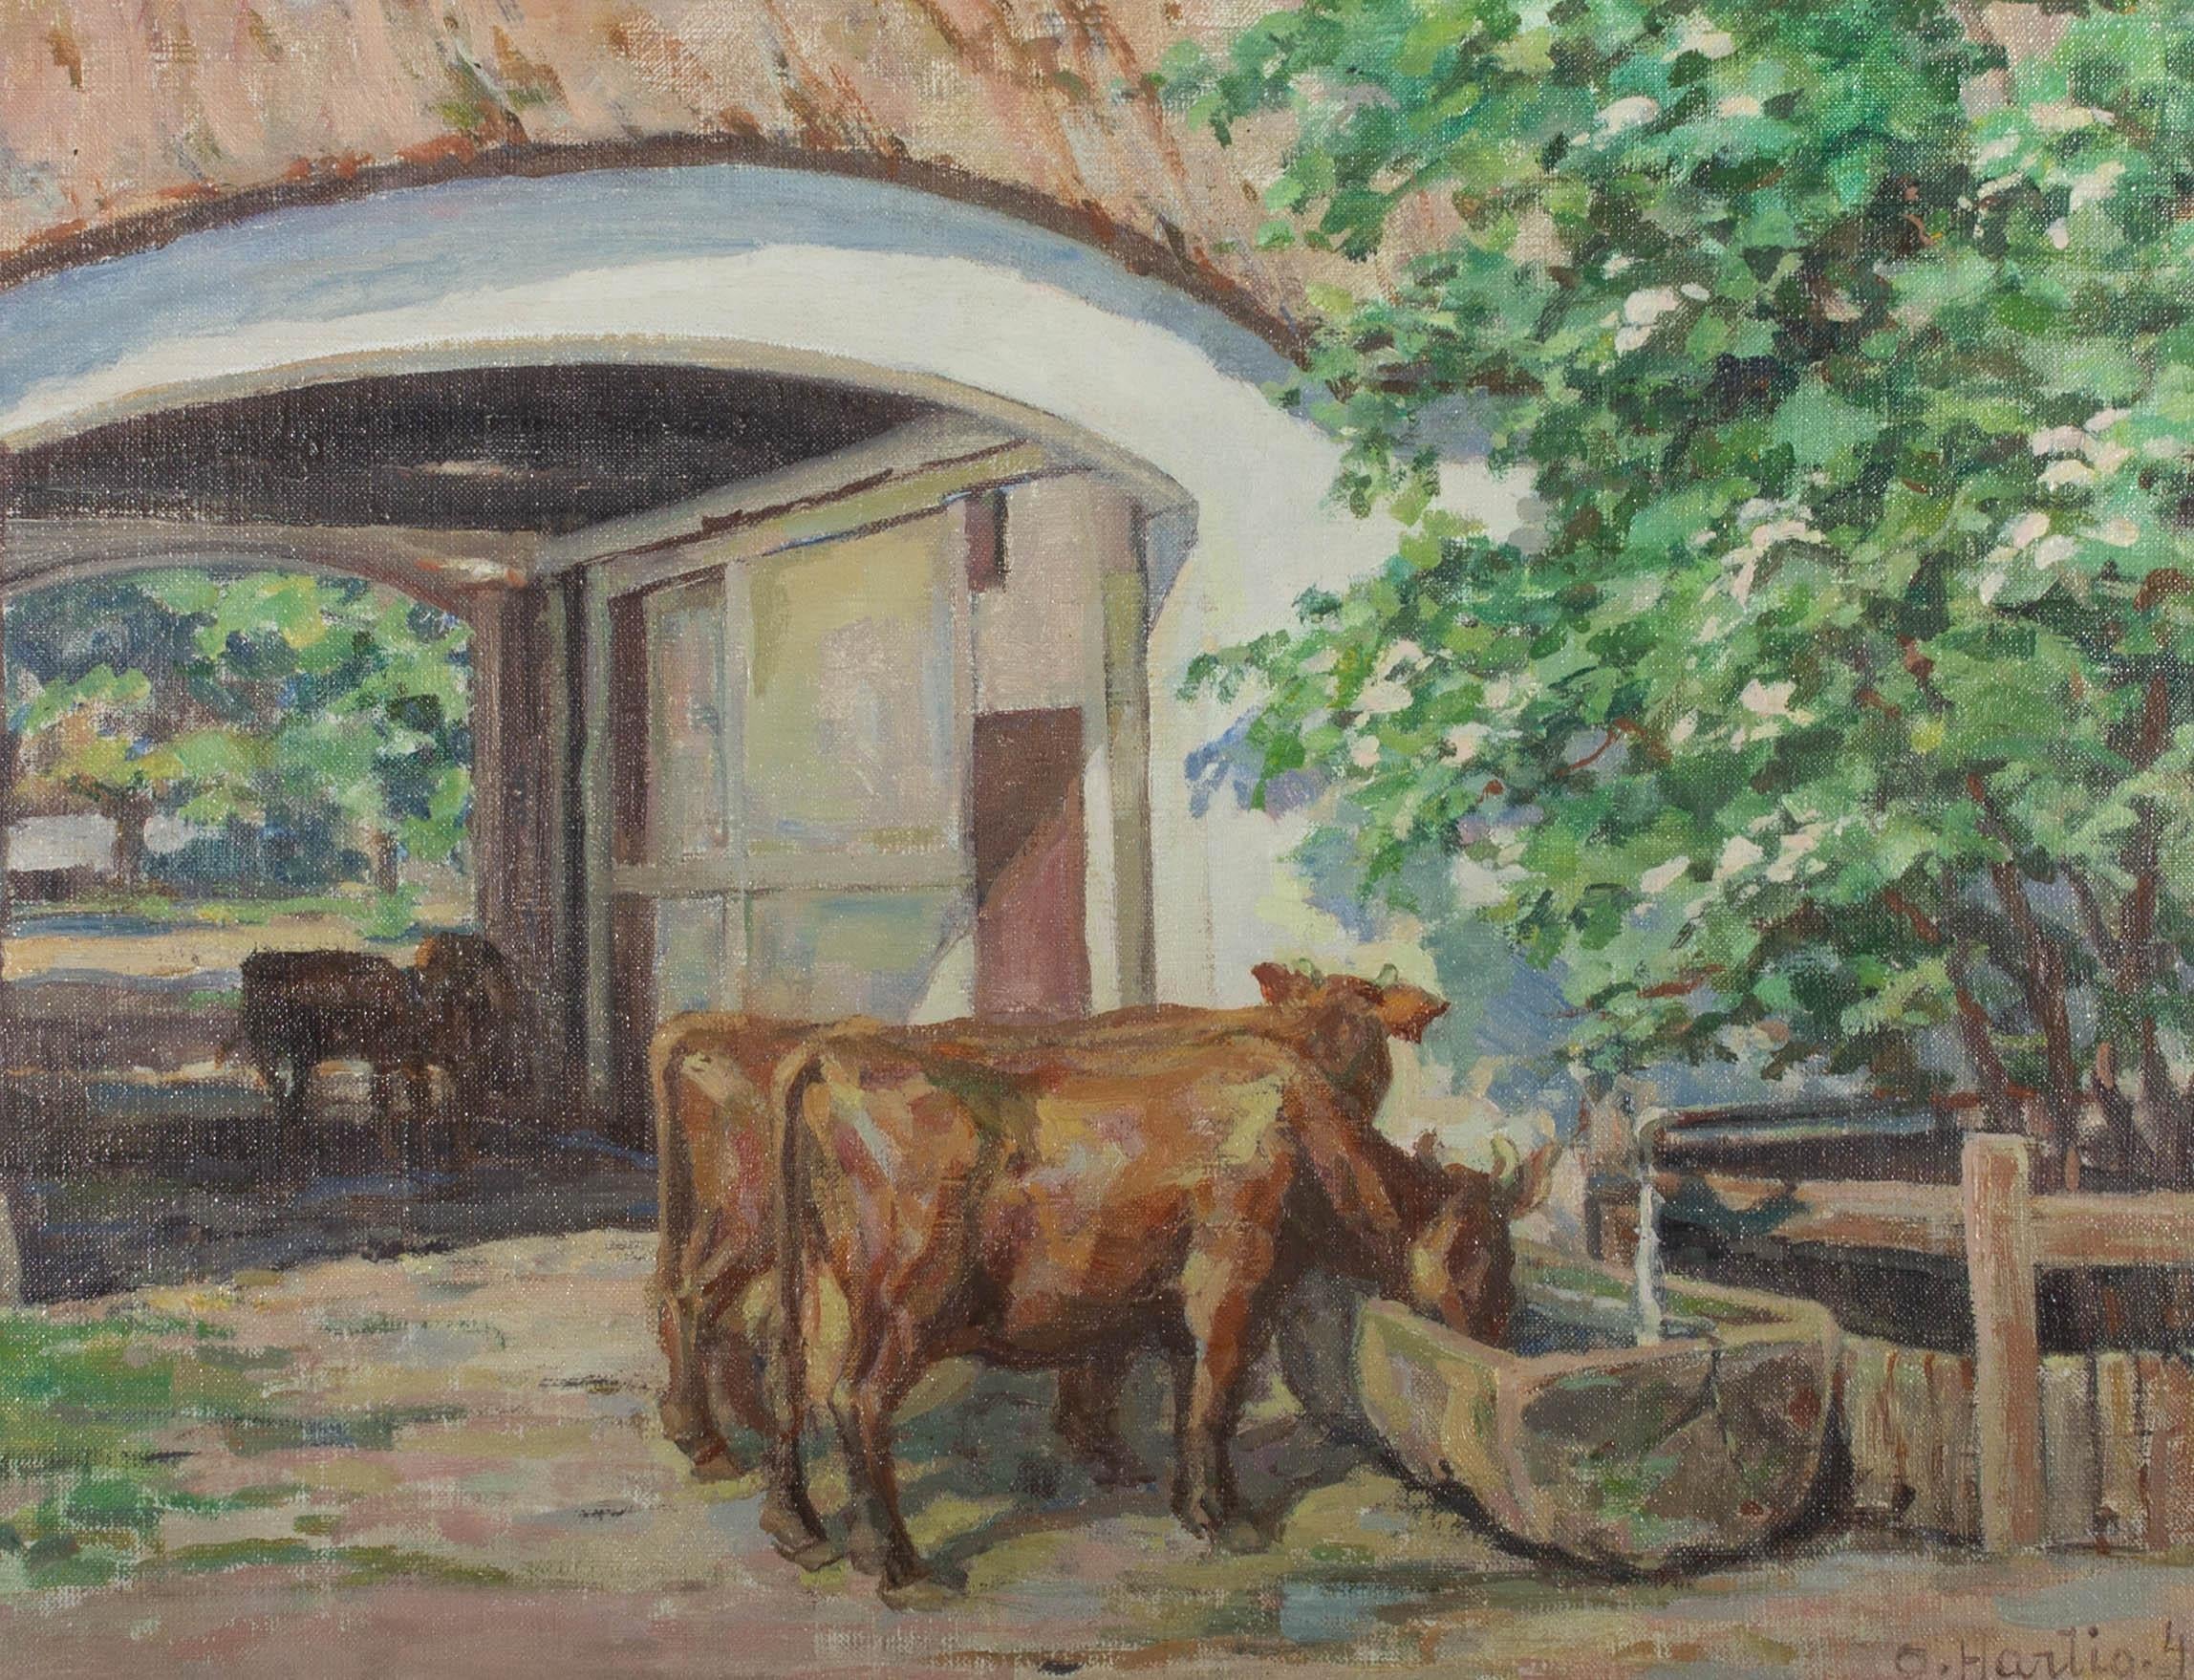 This summer scene depicts cows drinking from a sunlit trough near a large stone barn. Hartig's expressive brush strokes brings attention to the bright sun reflecting from the cows and trees in this idyllic country setting. Signed and dated in the